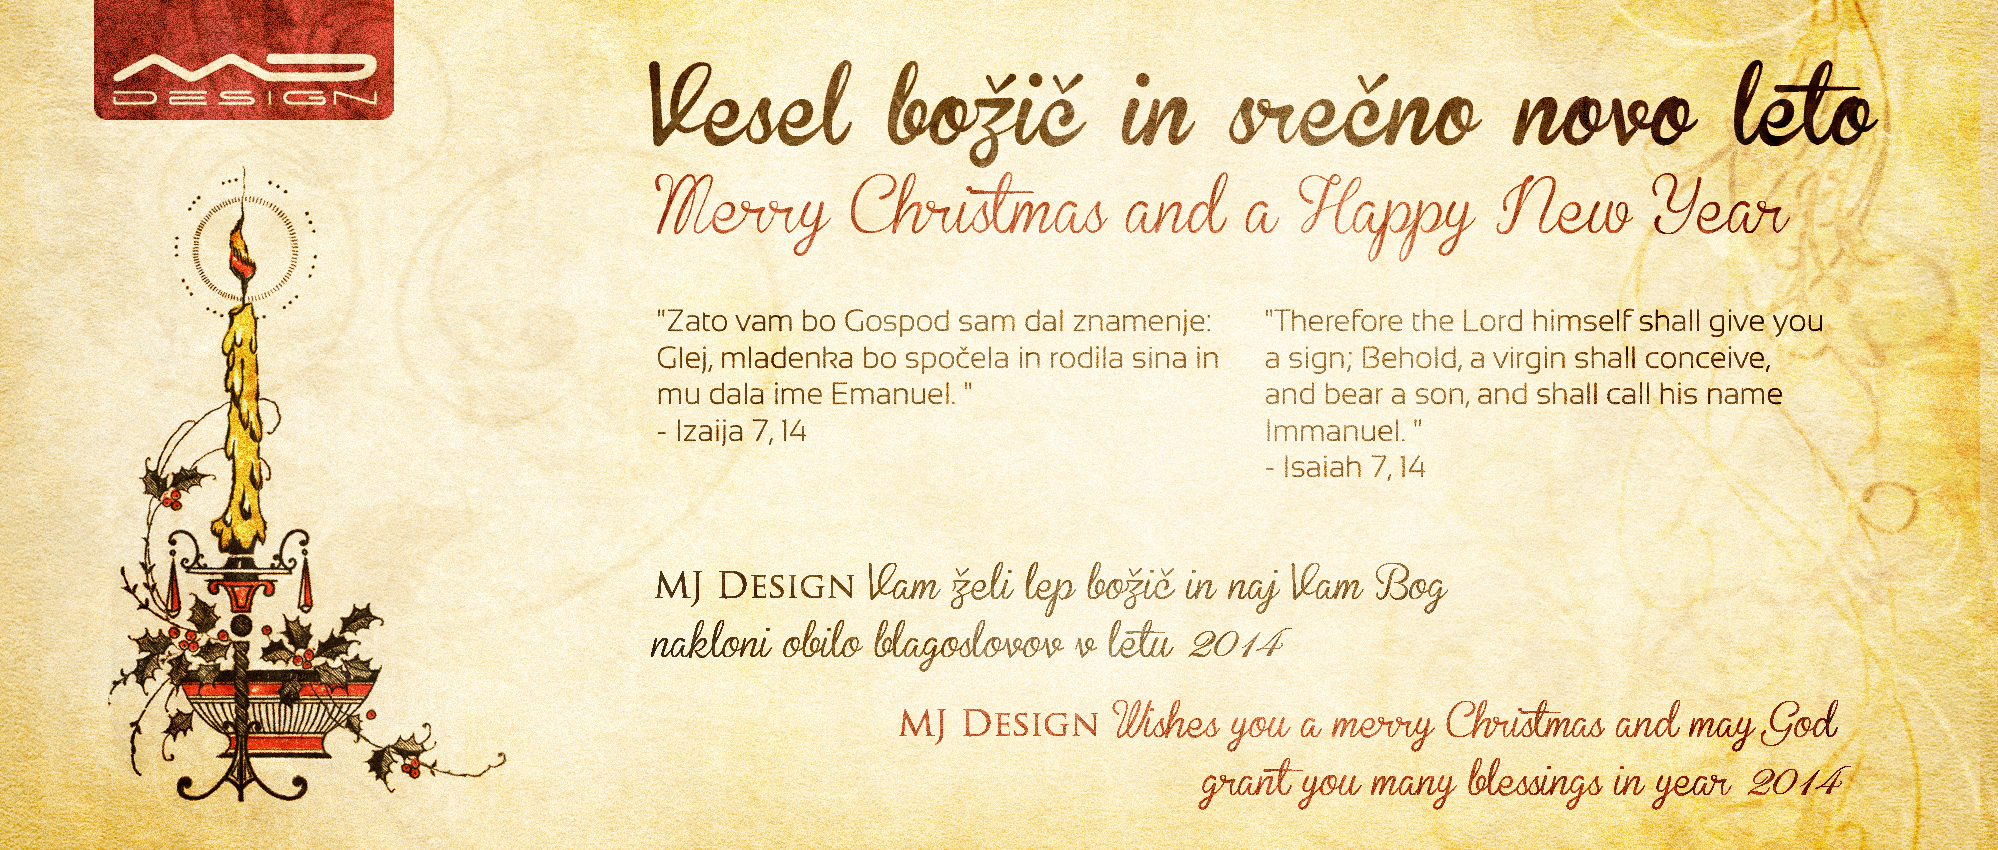 Merry Christmas and a happy New Year 2014